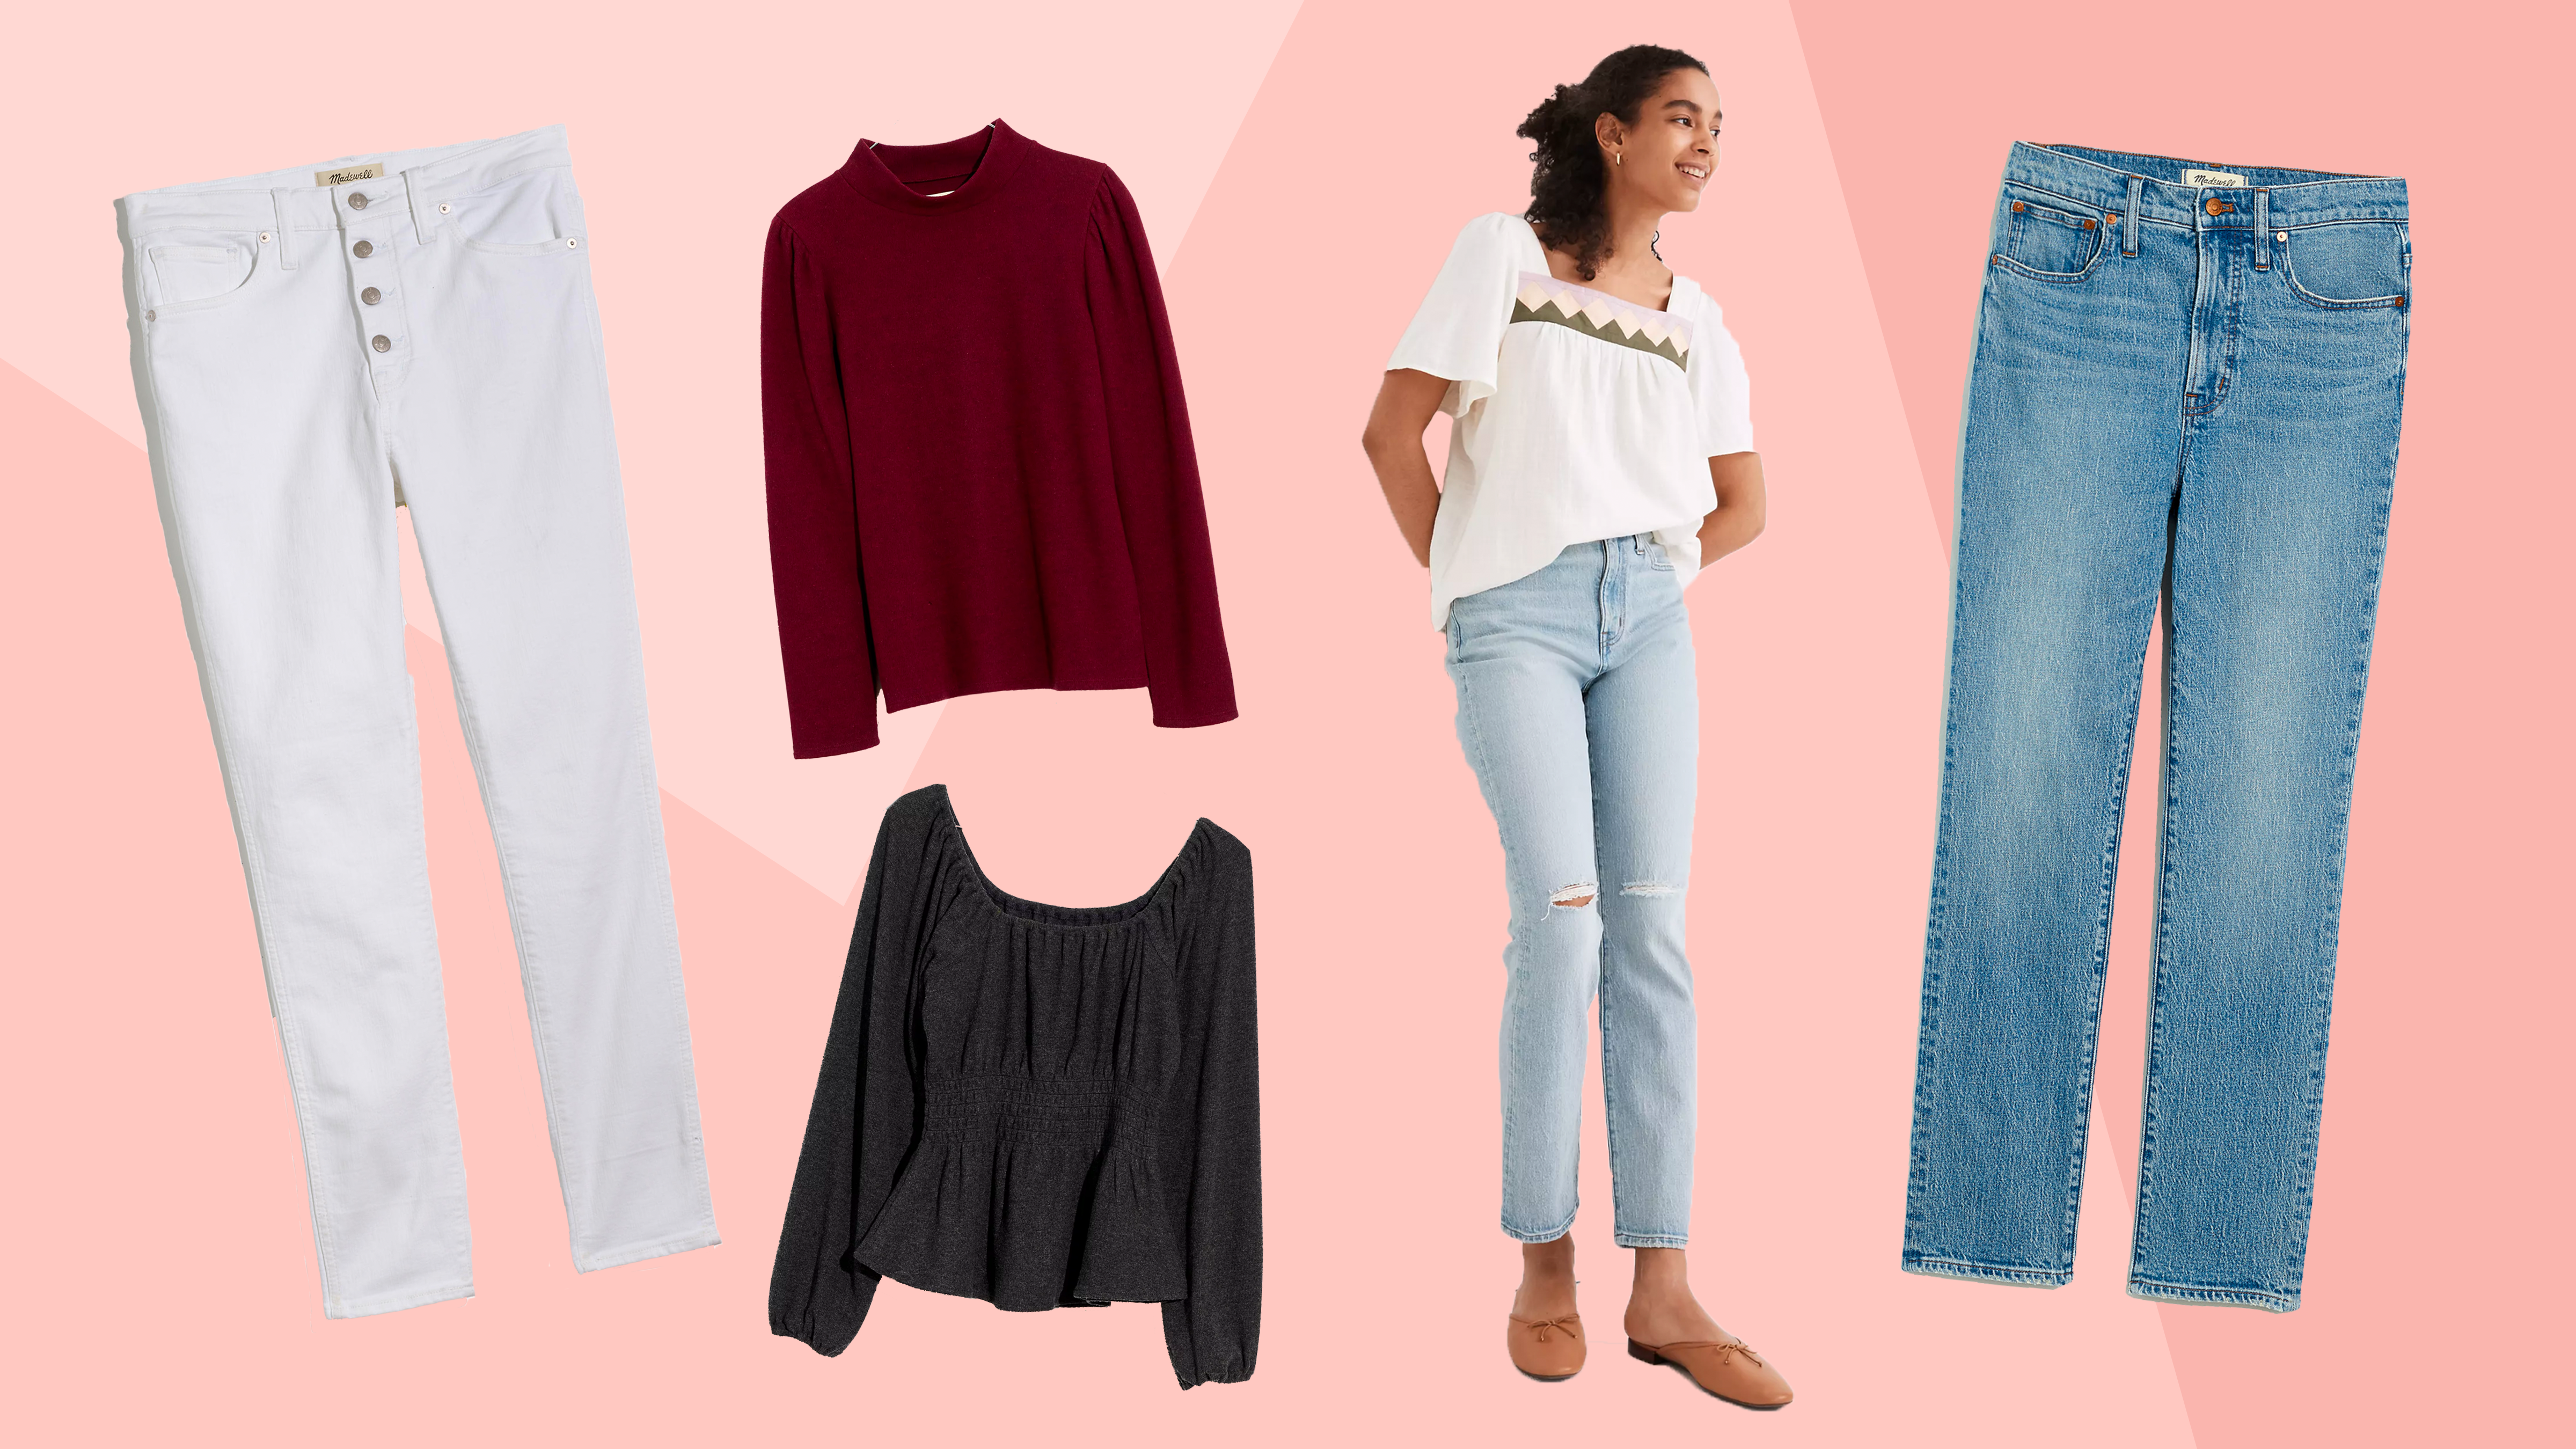 Get a pair of Madewell jeans for less than $24 during this blowout sale